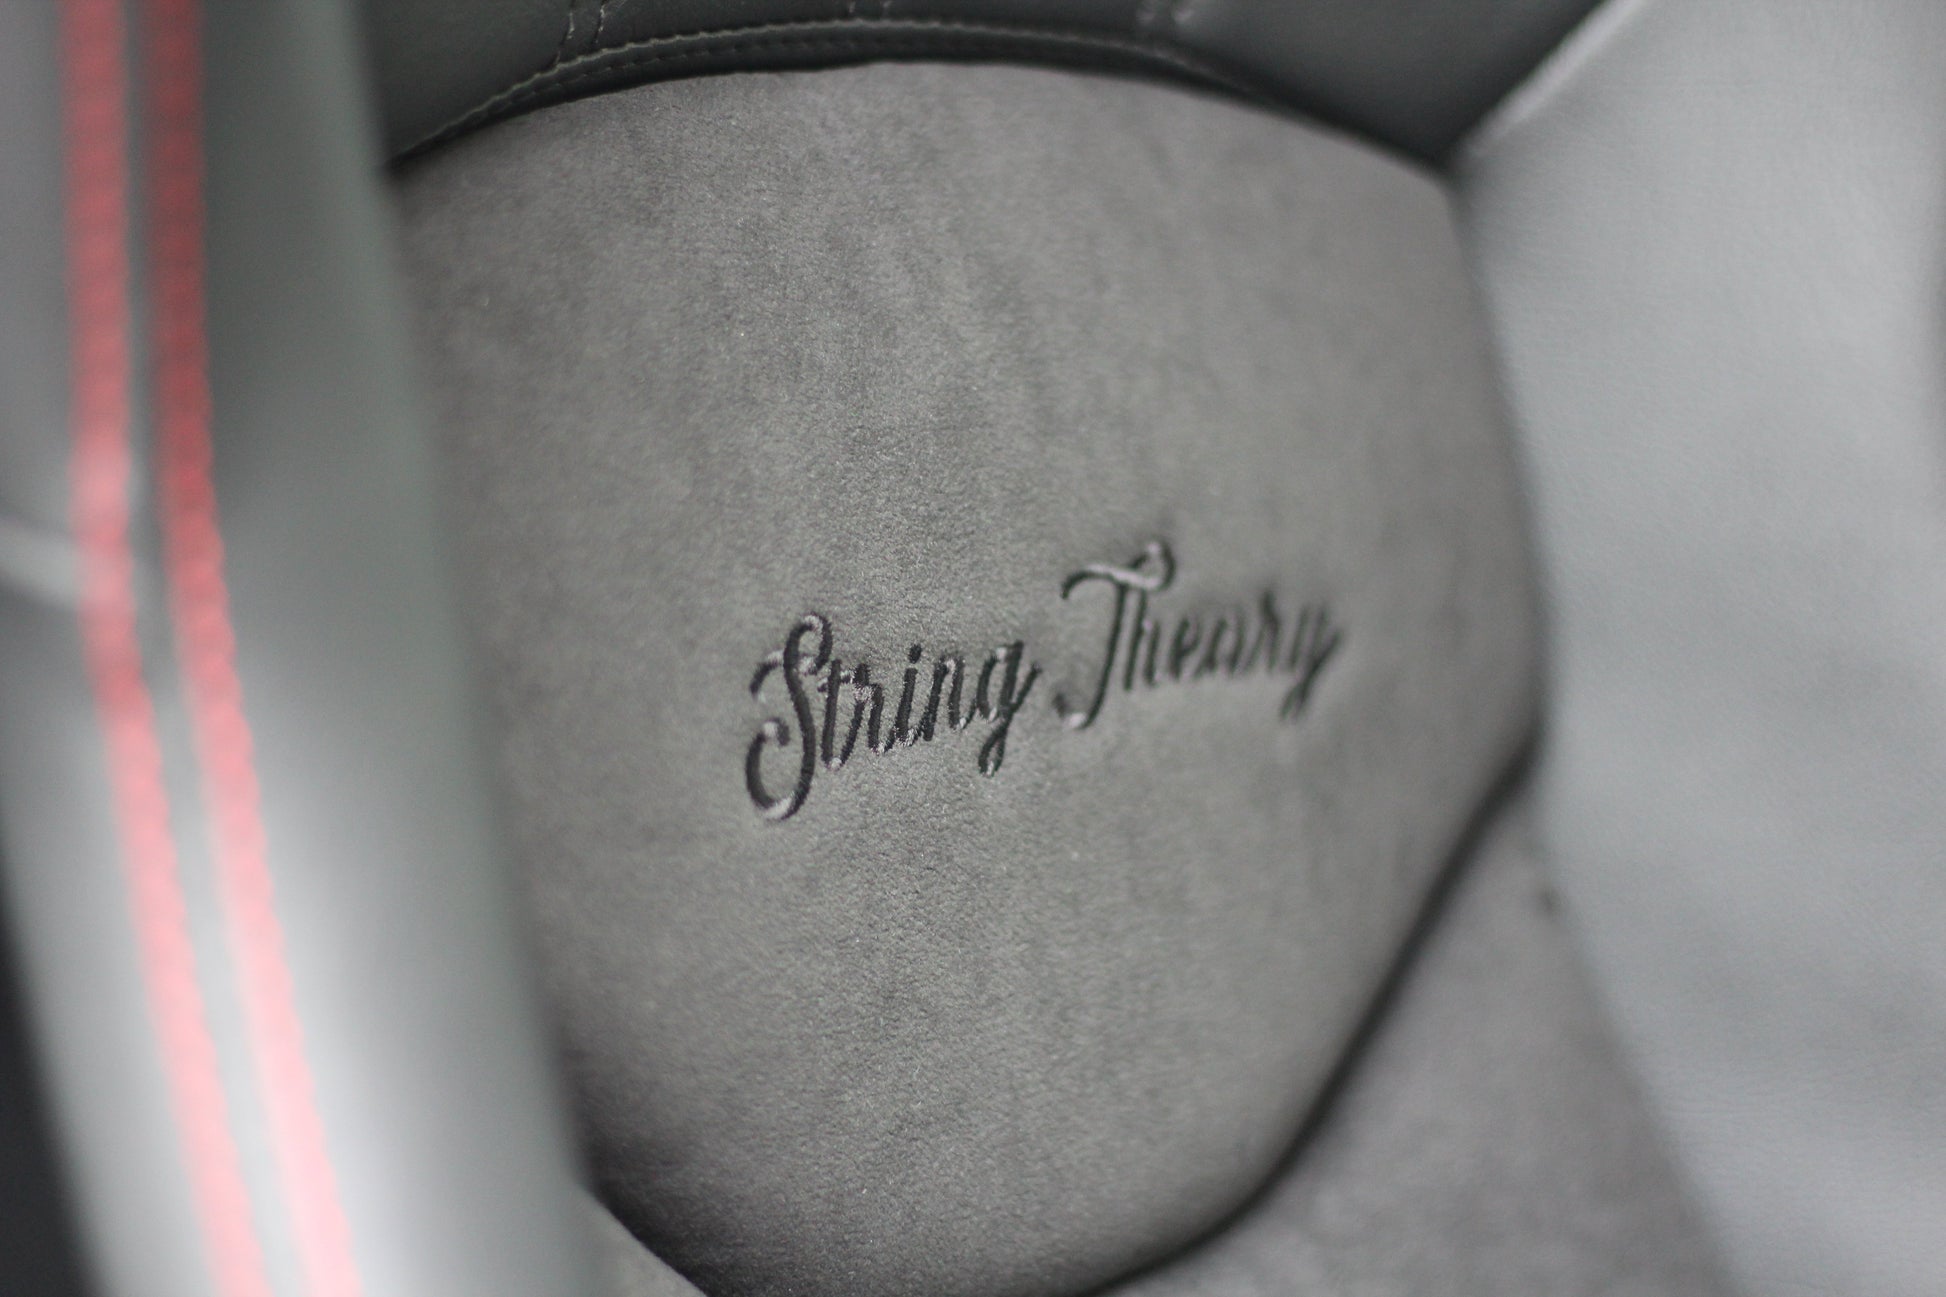 Close up view of the String Theory name sewn into the back rest of the seat